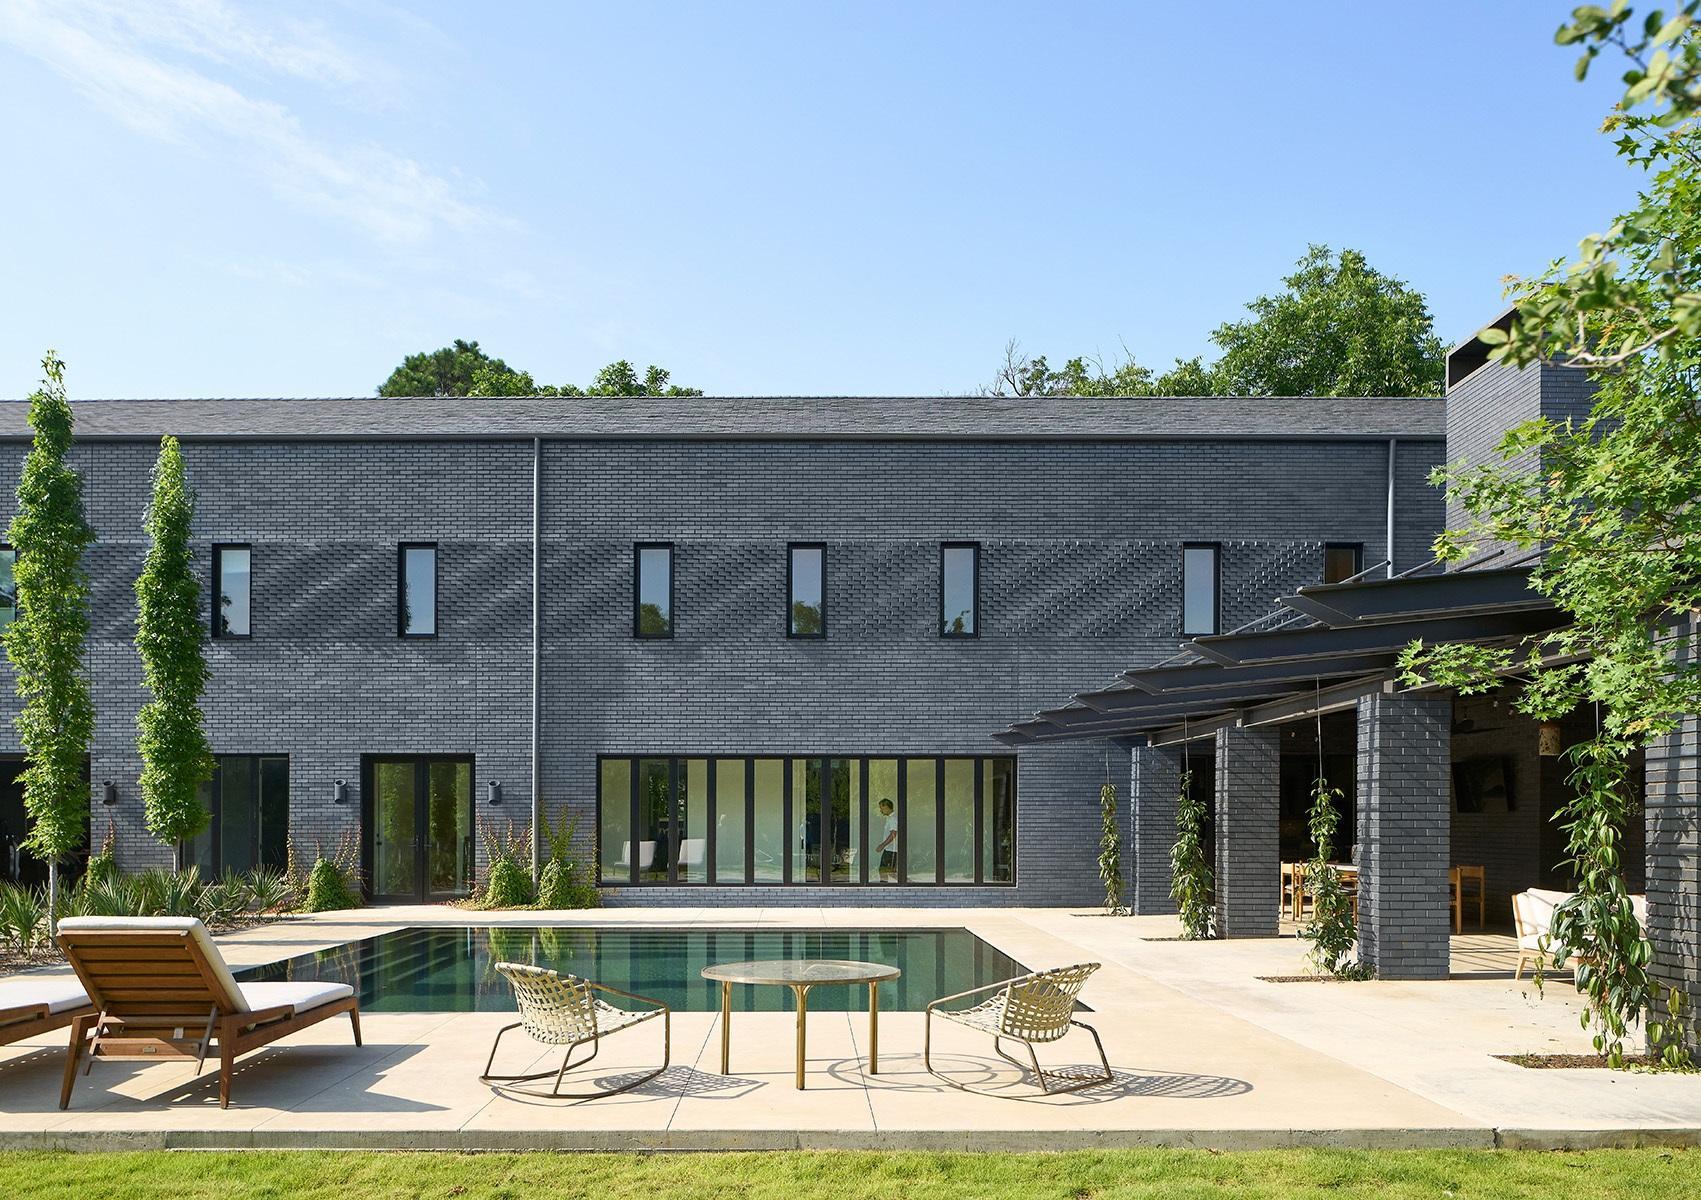 The dark brick exterior lends modern styling to the Robin Road Residence